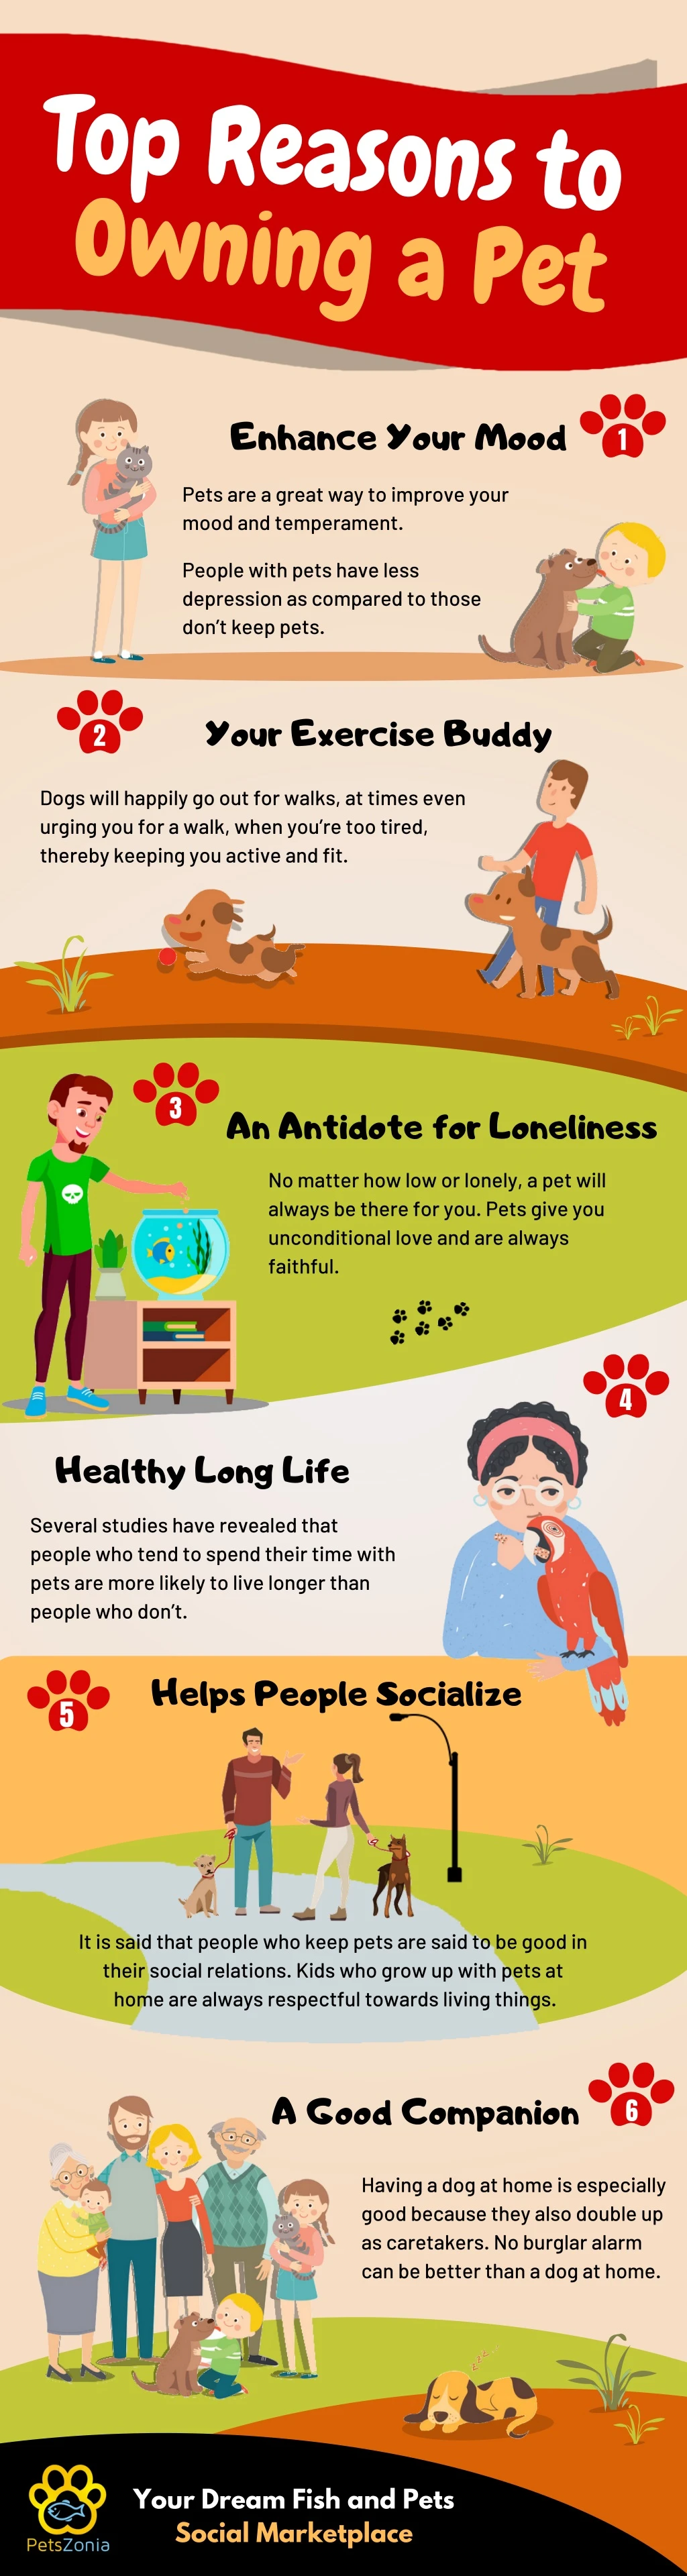 top reasons to owning a pet